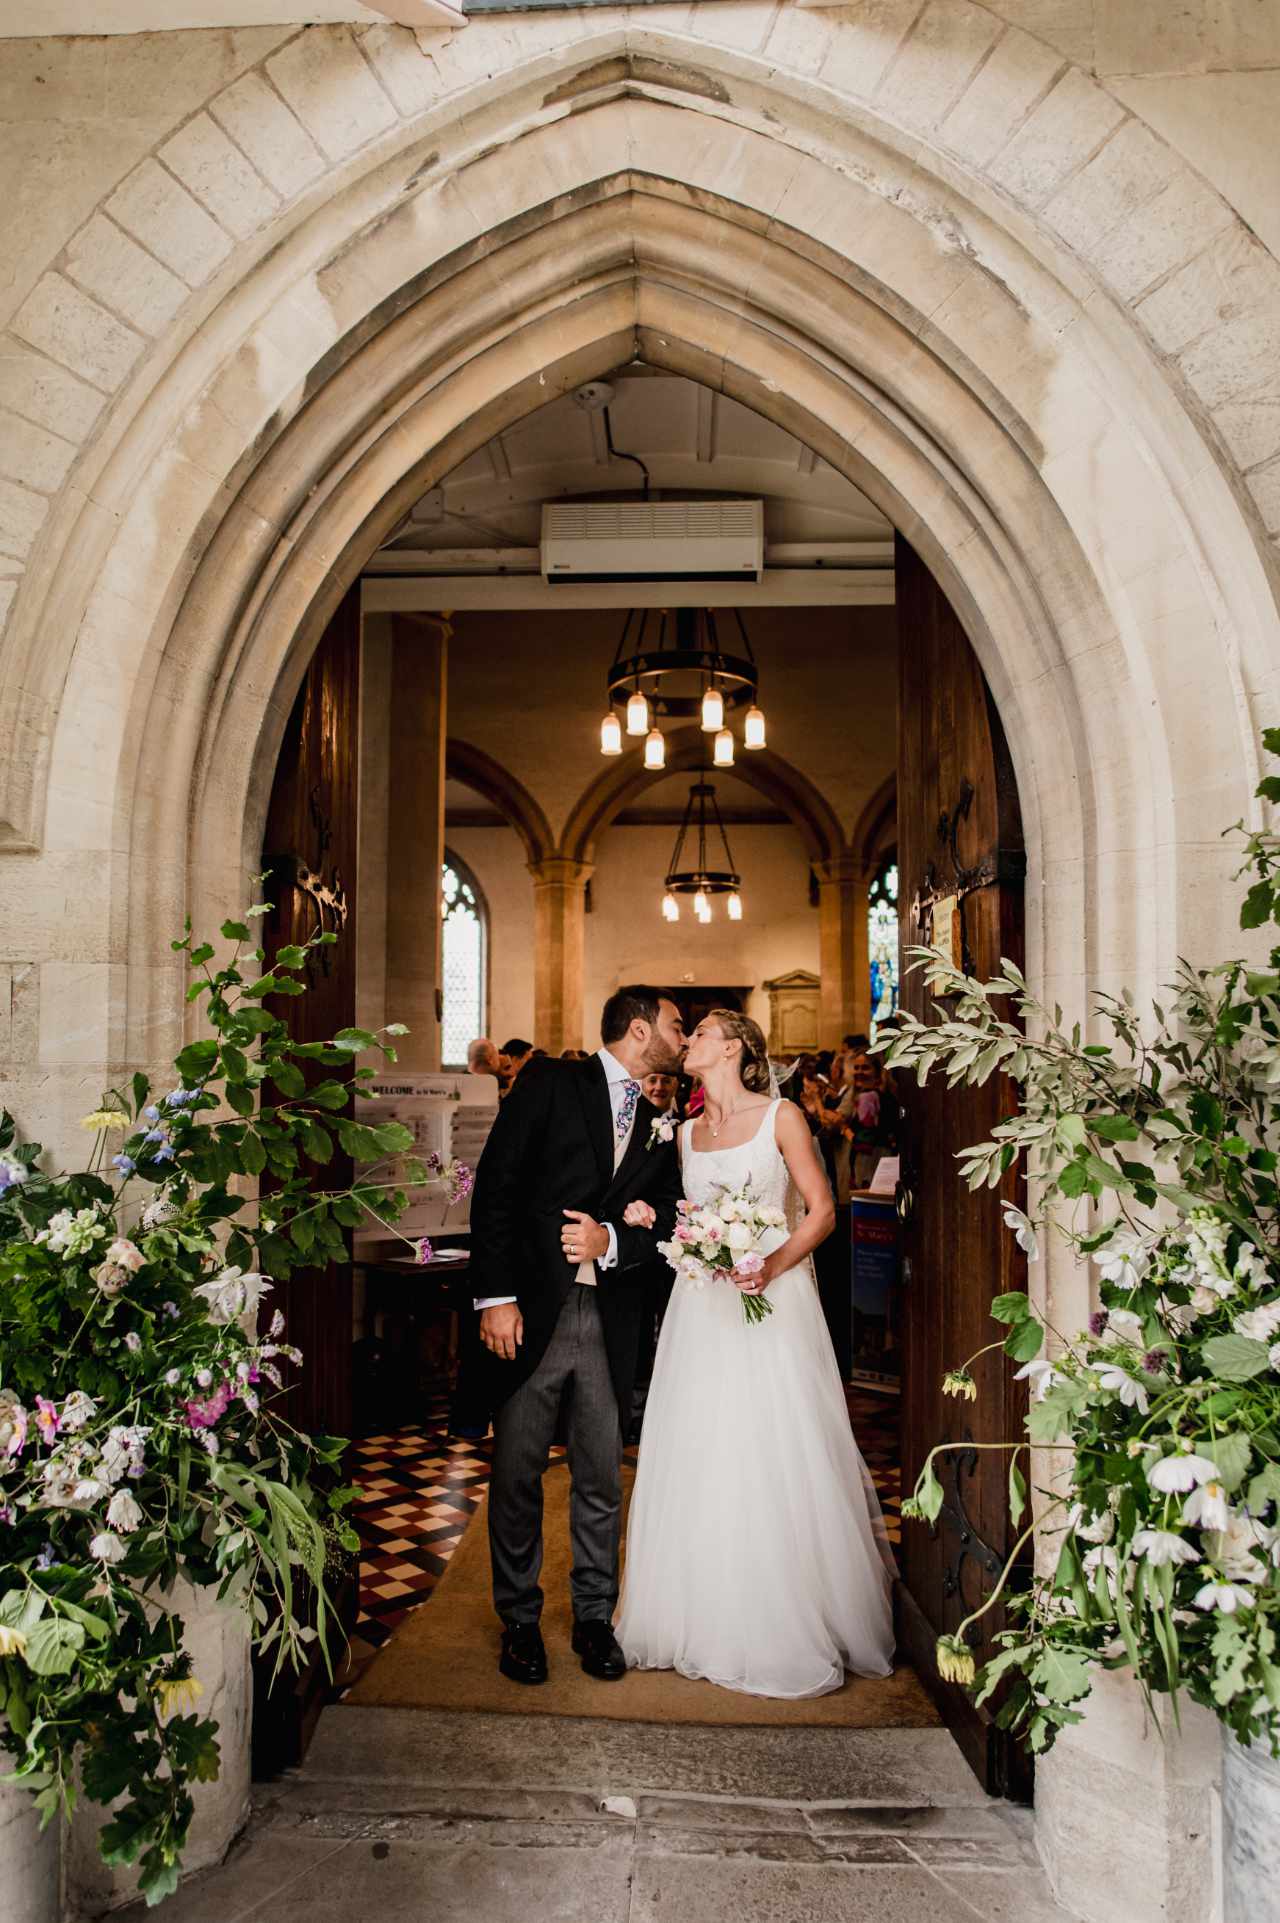 Bride and groom in church archway with flowers